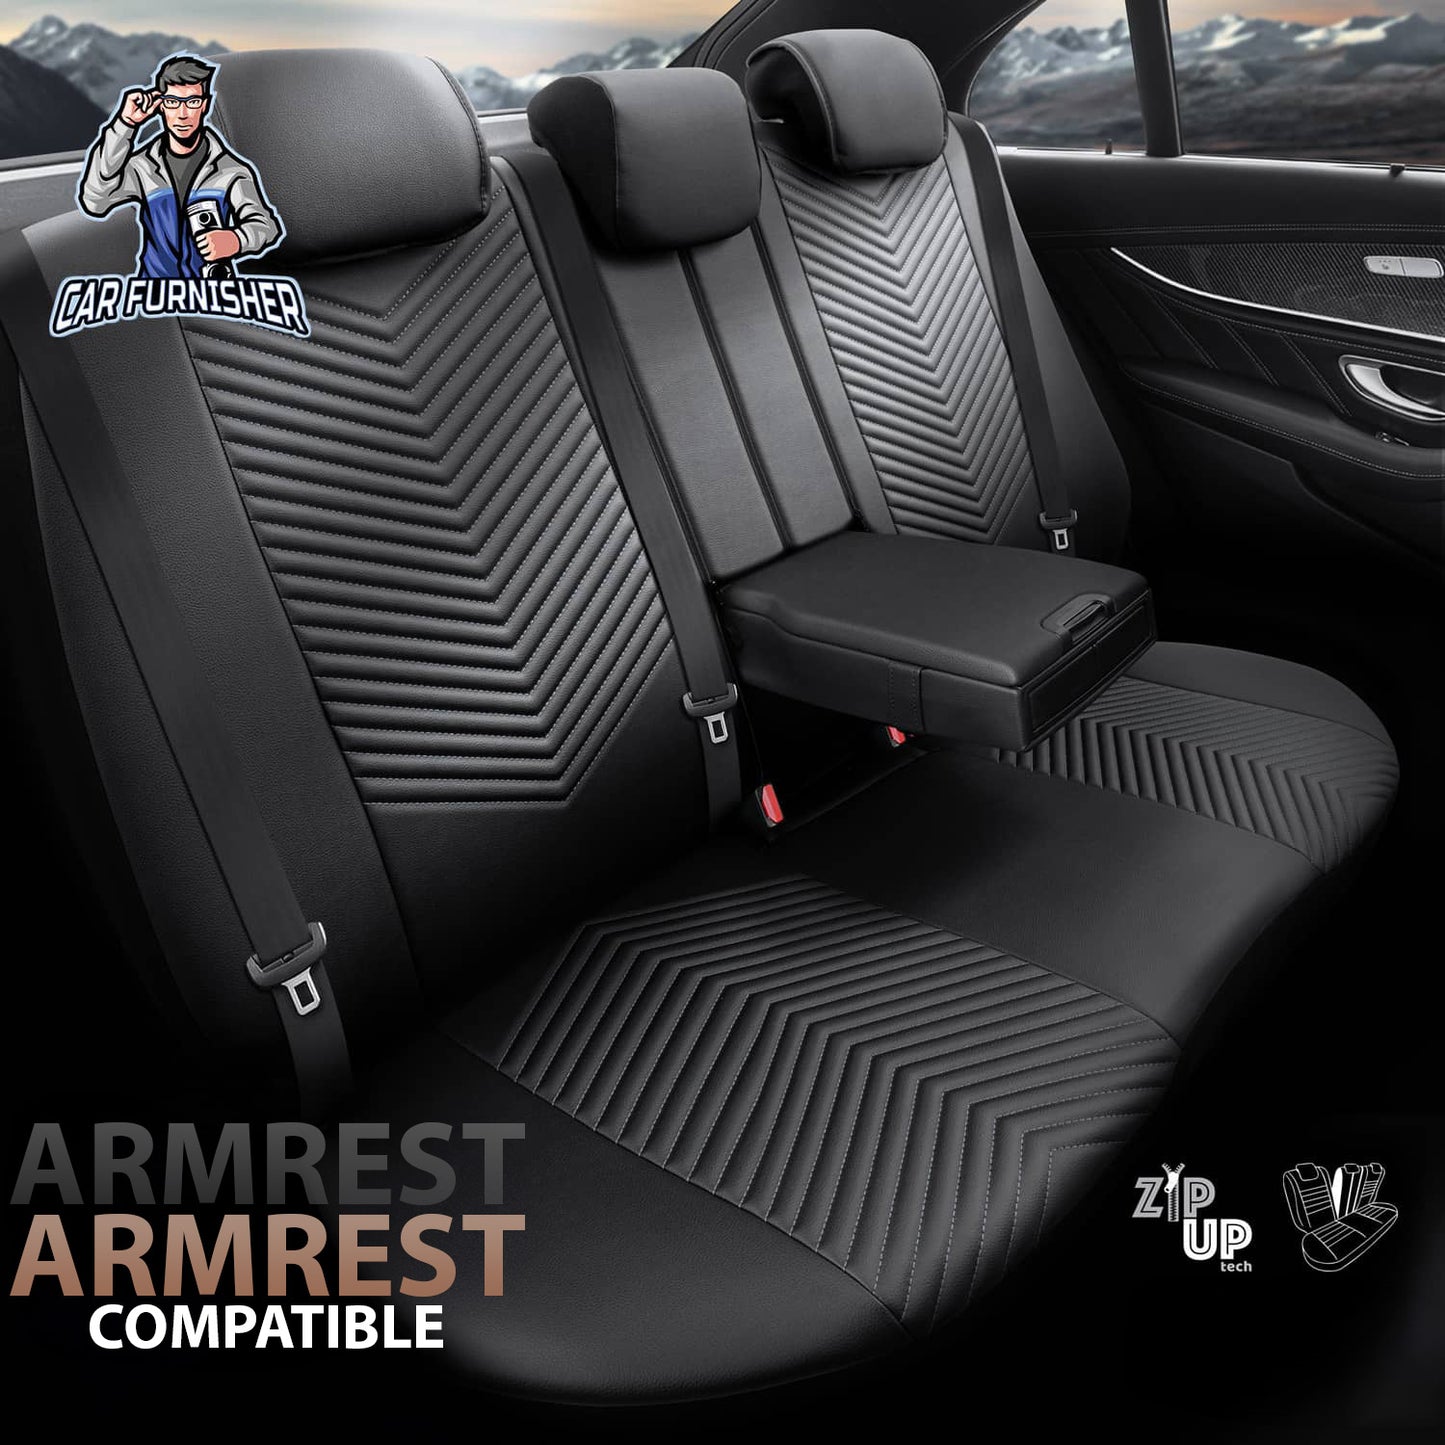 Car Seat Cover Set - Advanced Design Smoked 5 Seats + Headrests (Full Set) Leather & Linen Fabric